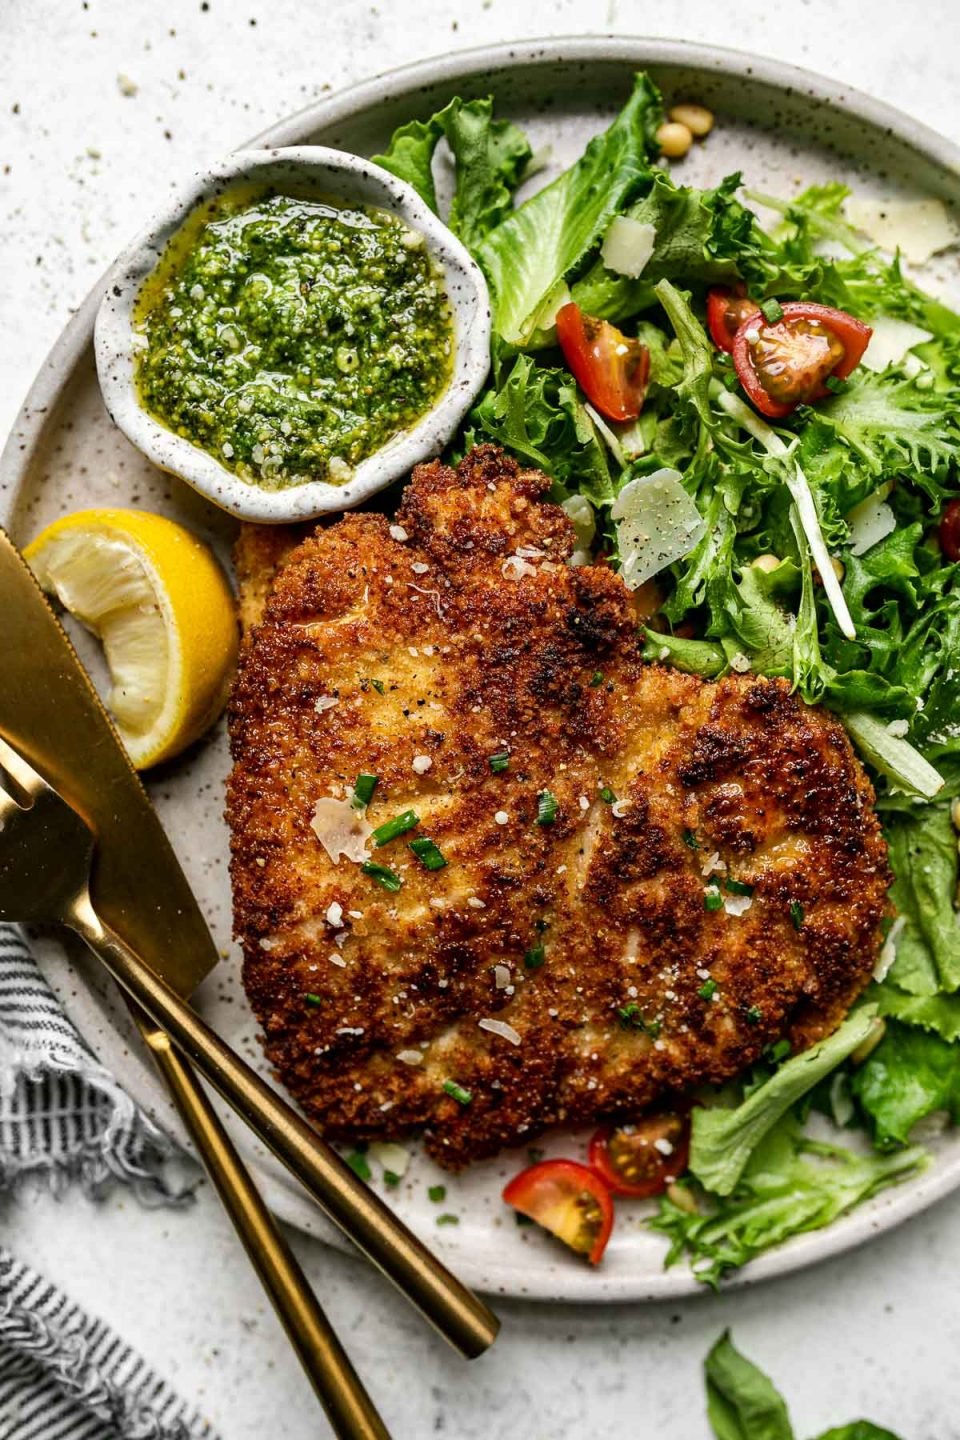 Parmsean chicken breast on a large plate with a green salad & a small bowl of pesto. The plate sits atop a white surface, next to a gray striped linen napkin.